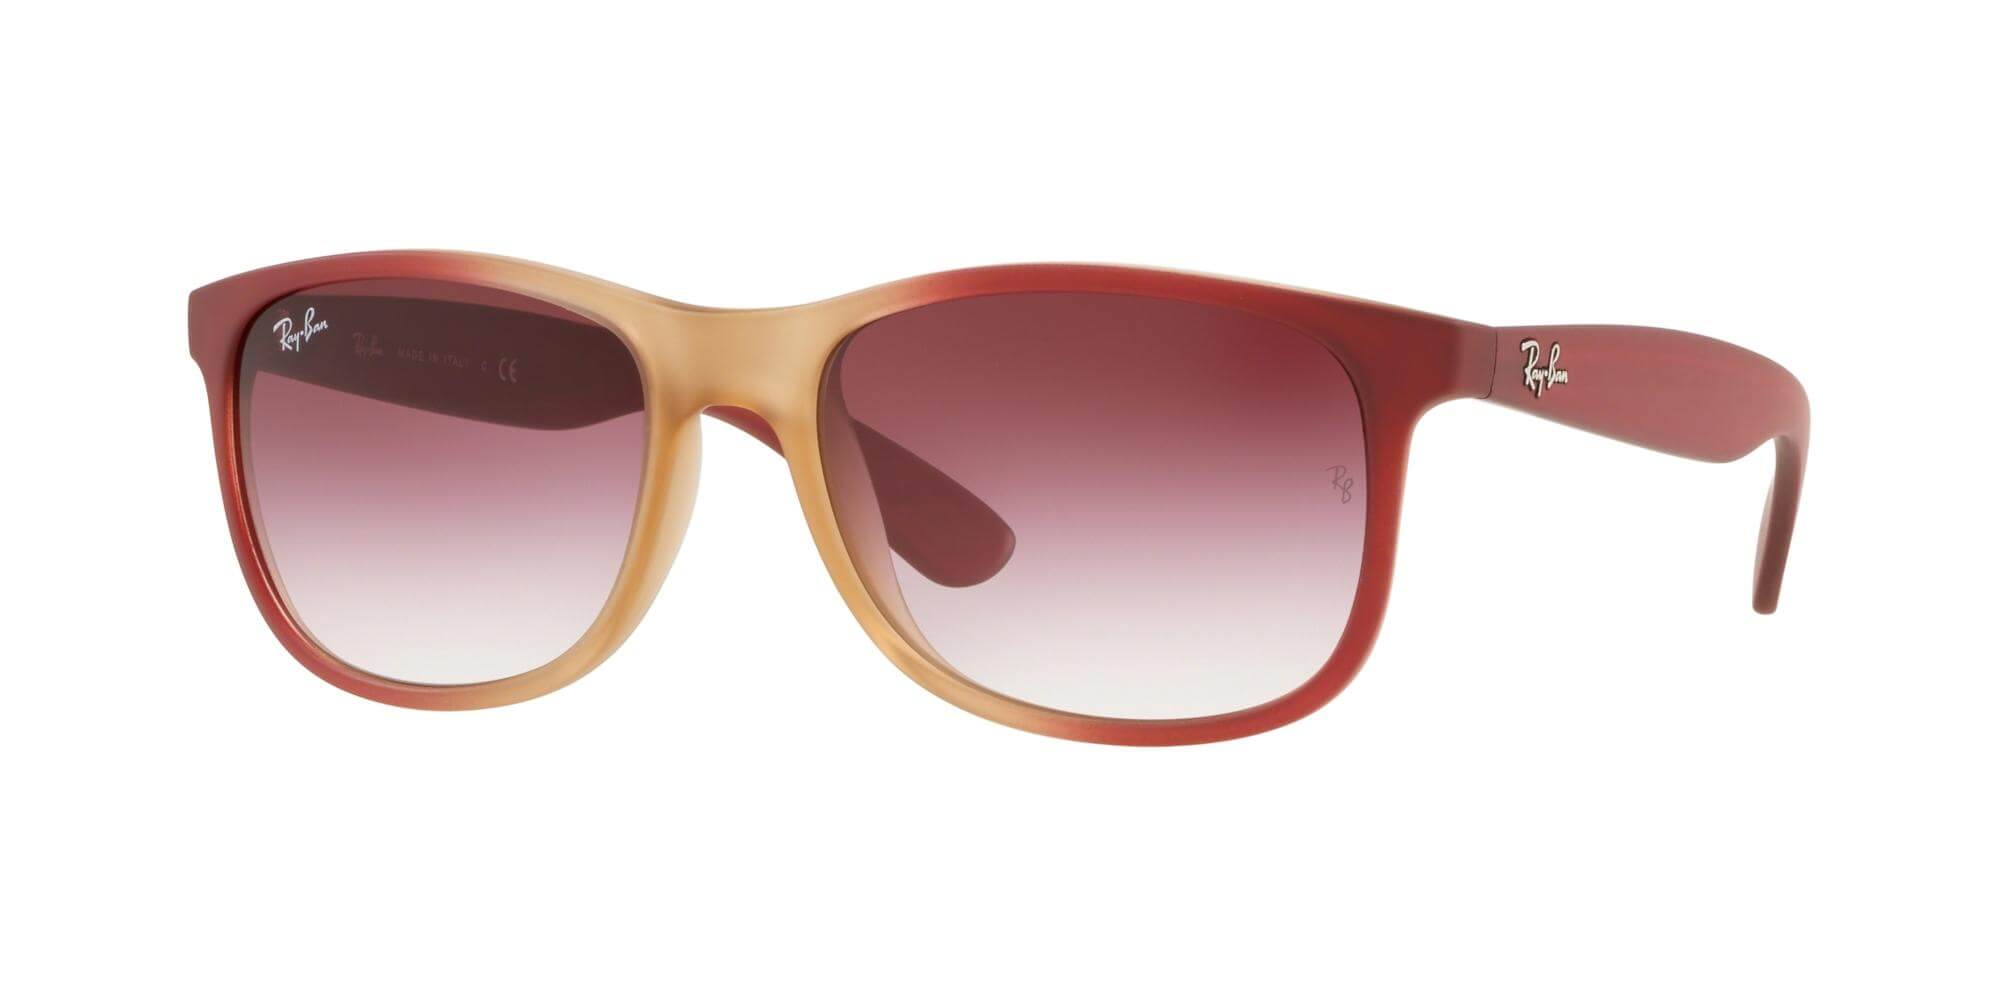 Ray-BanANDY RB 4202Beige Burgundy/violet Shaded (6369/8H)